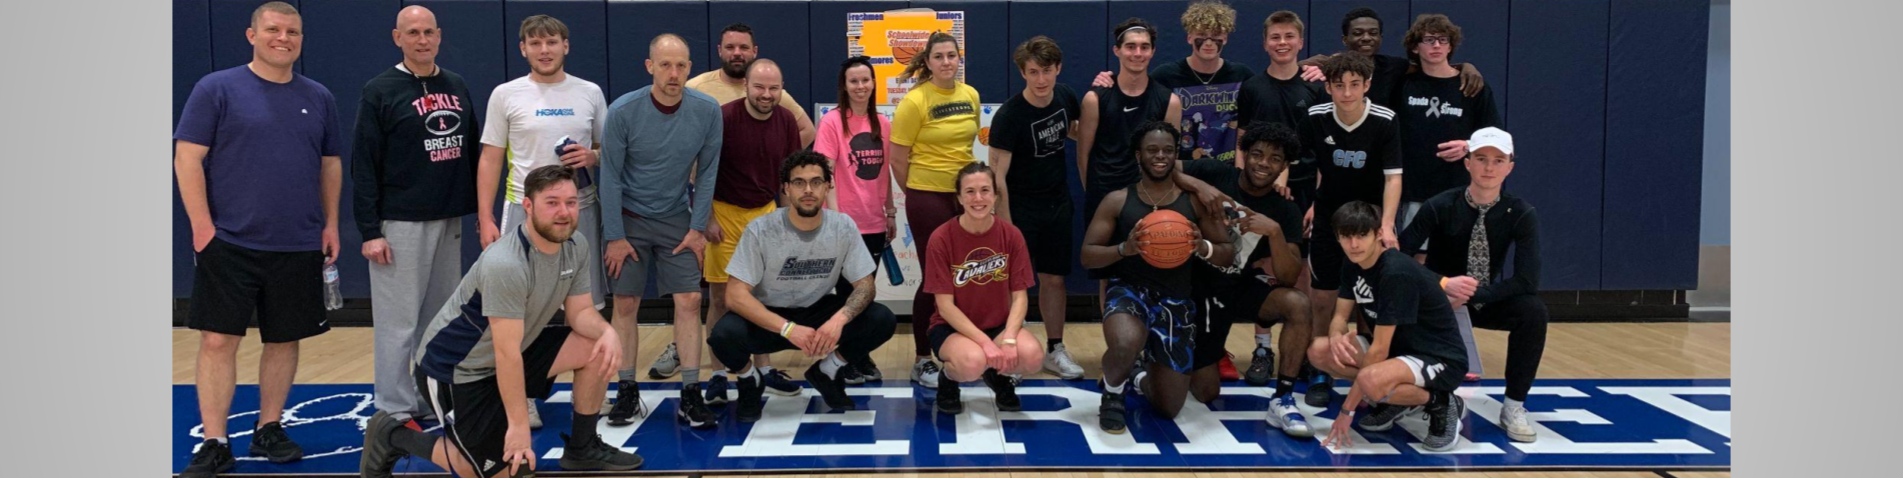 Student-staff photo after basketball game